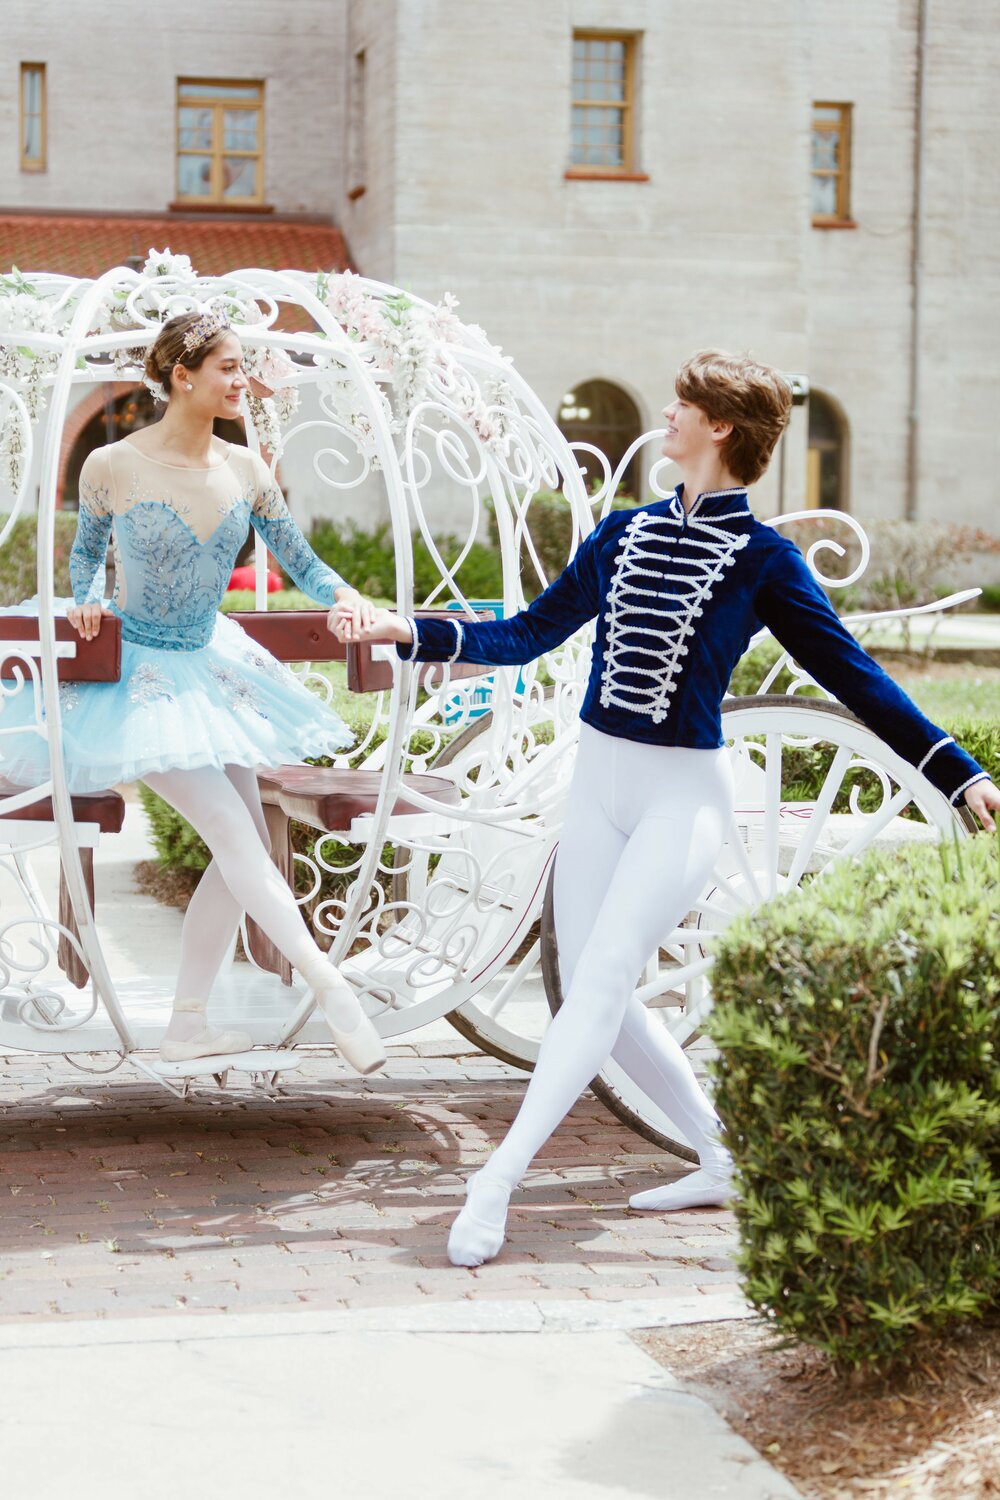 Dancers Claudia Mueckay and Jake Karger as Cinderella and the Prince in ‘Cinderella’ to be presented May 20 and 21 at Lewis Auditorium in St. Augustine.